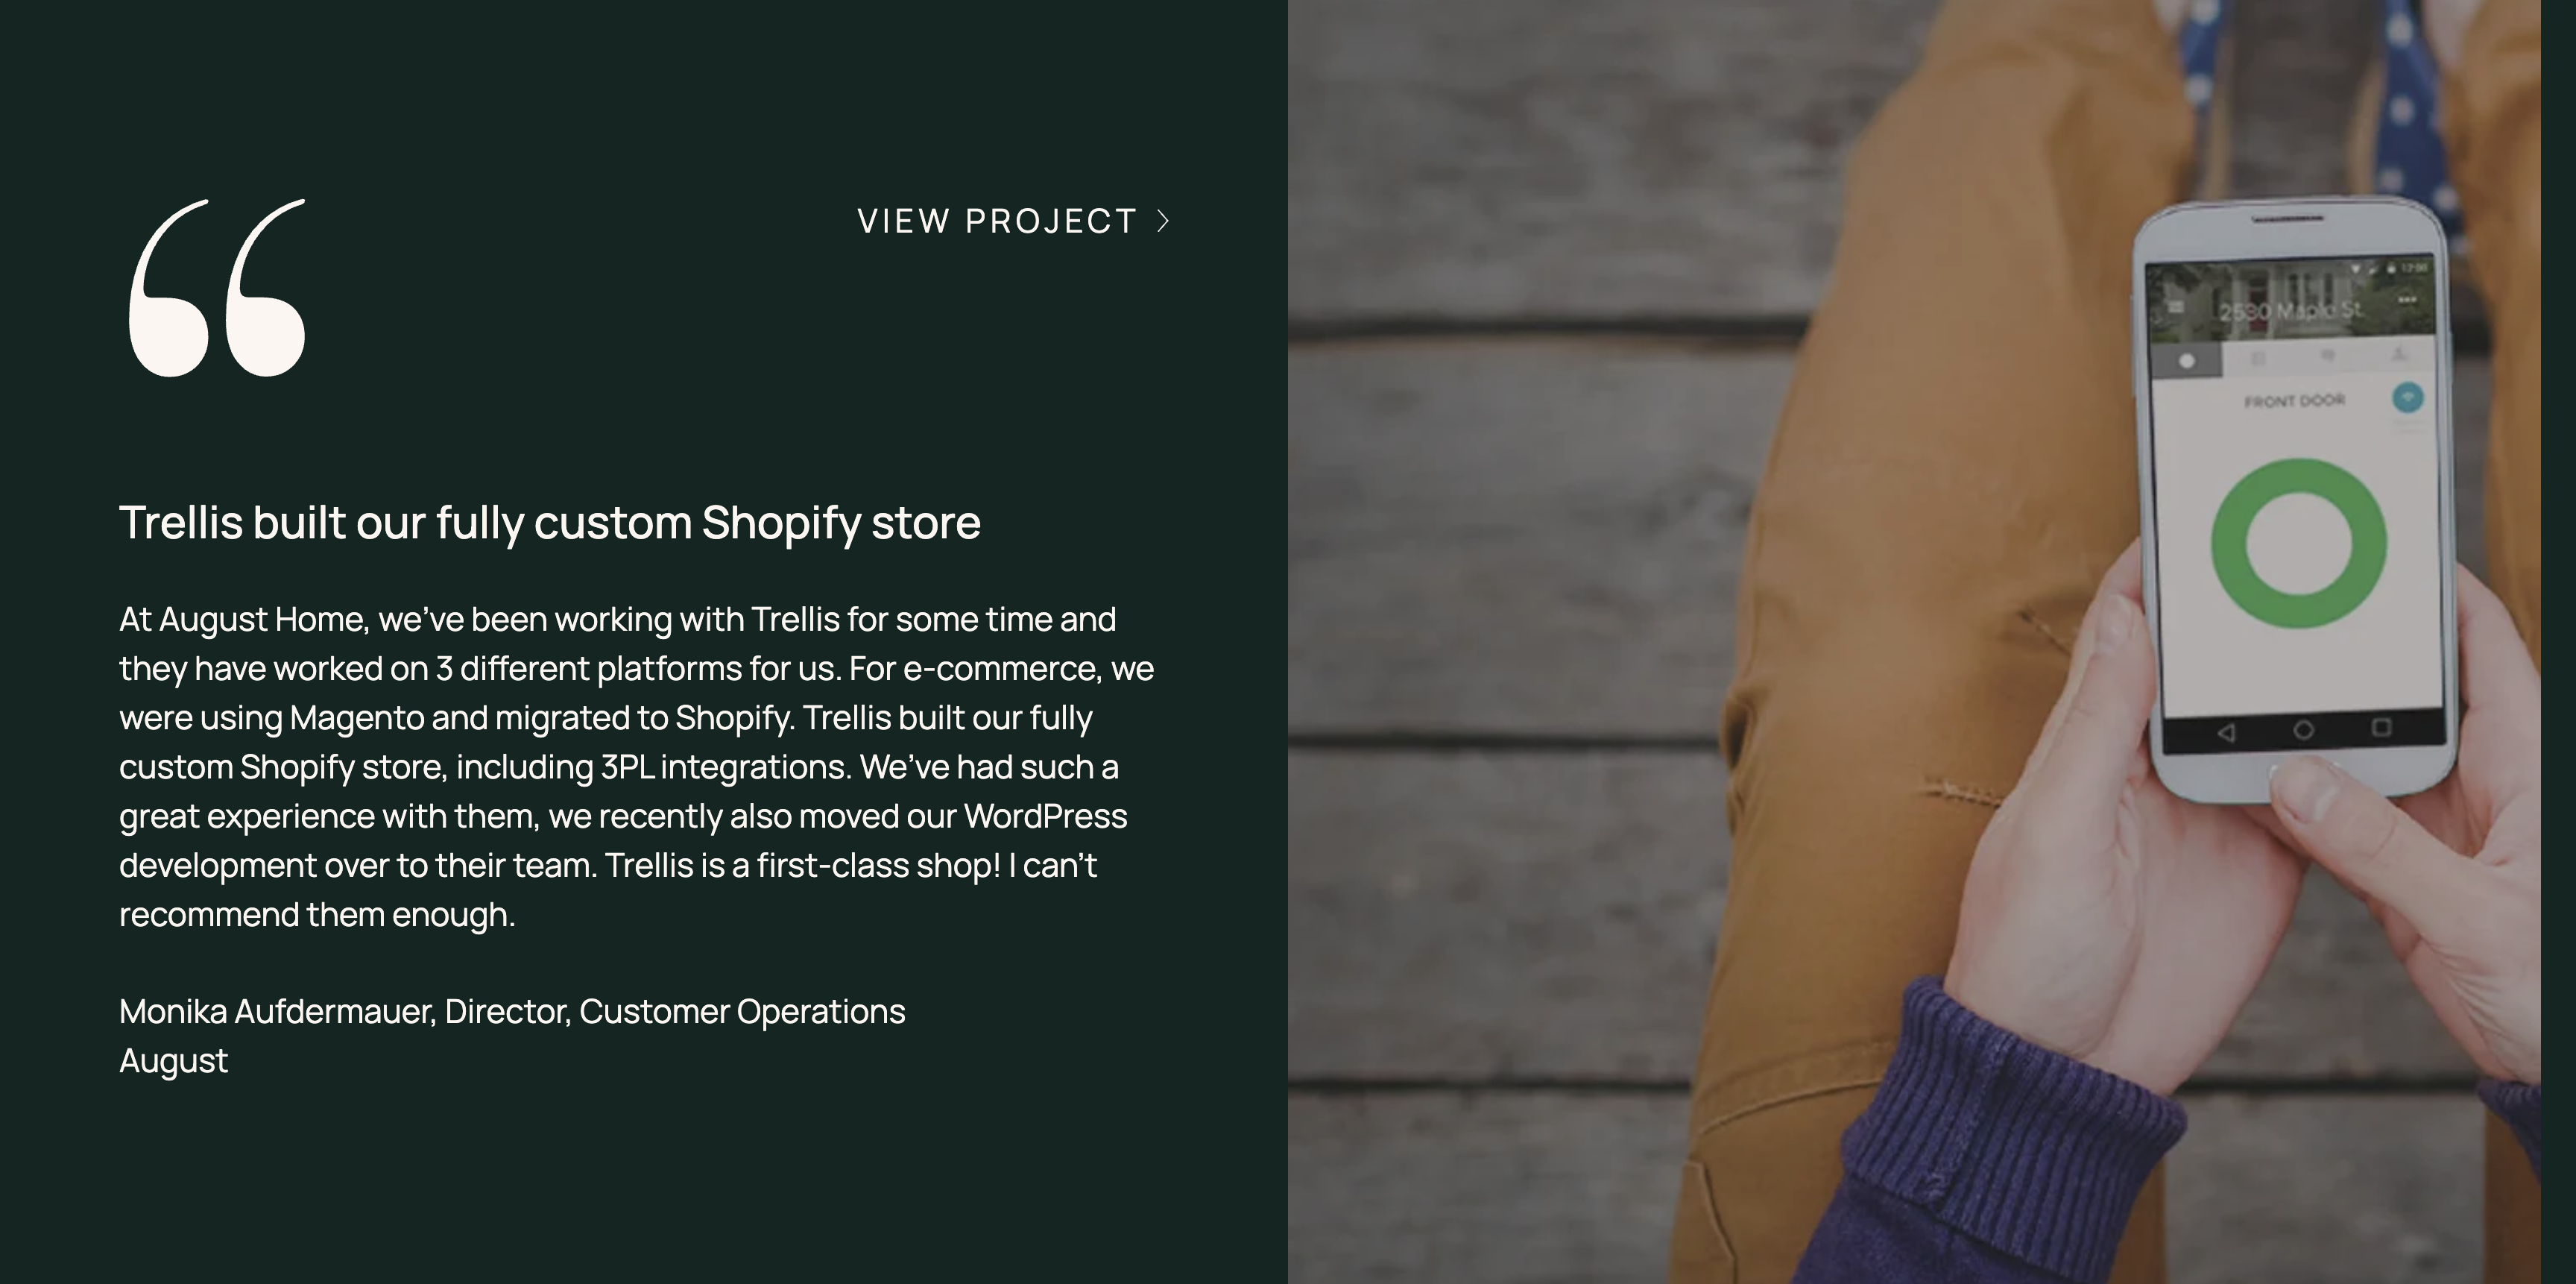 The image features a split design with a quote and text on the left, and a photograph on the right. On the left, there's a testimonial quote praising "Trellis" for building a "fully custom Shopify store" for "August Home", highlighting Shopify B2B Features